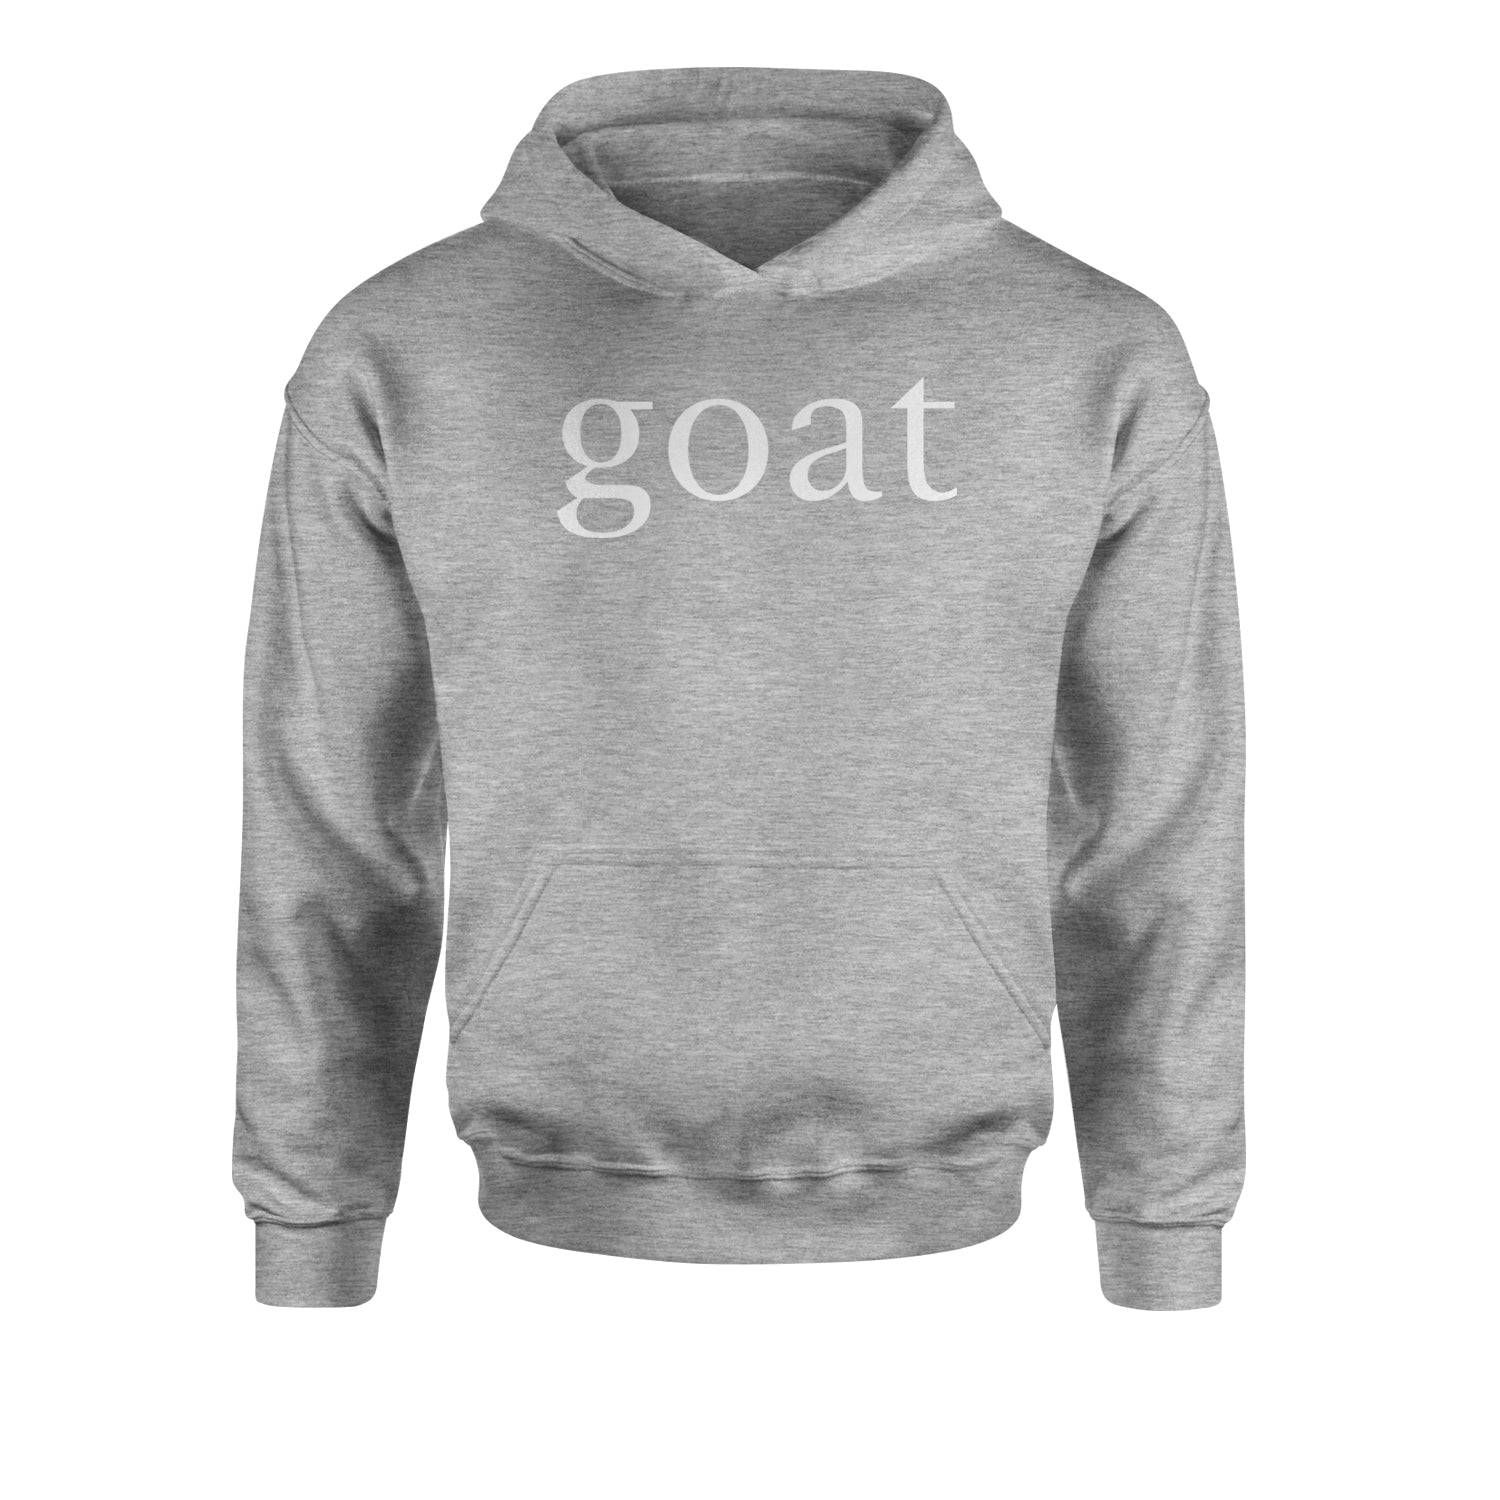 GOAT - Greatest Of All Time Youth-Sized Hoodie all, goat, greatest, hip, hiphop, hop, in, new, of, rap, time, york by Expression Tees